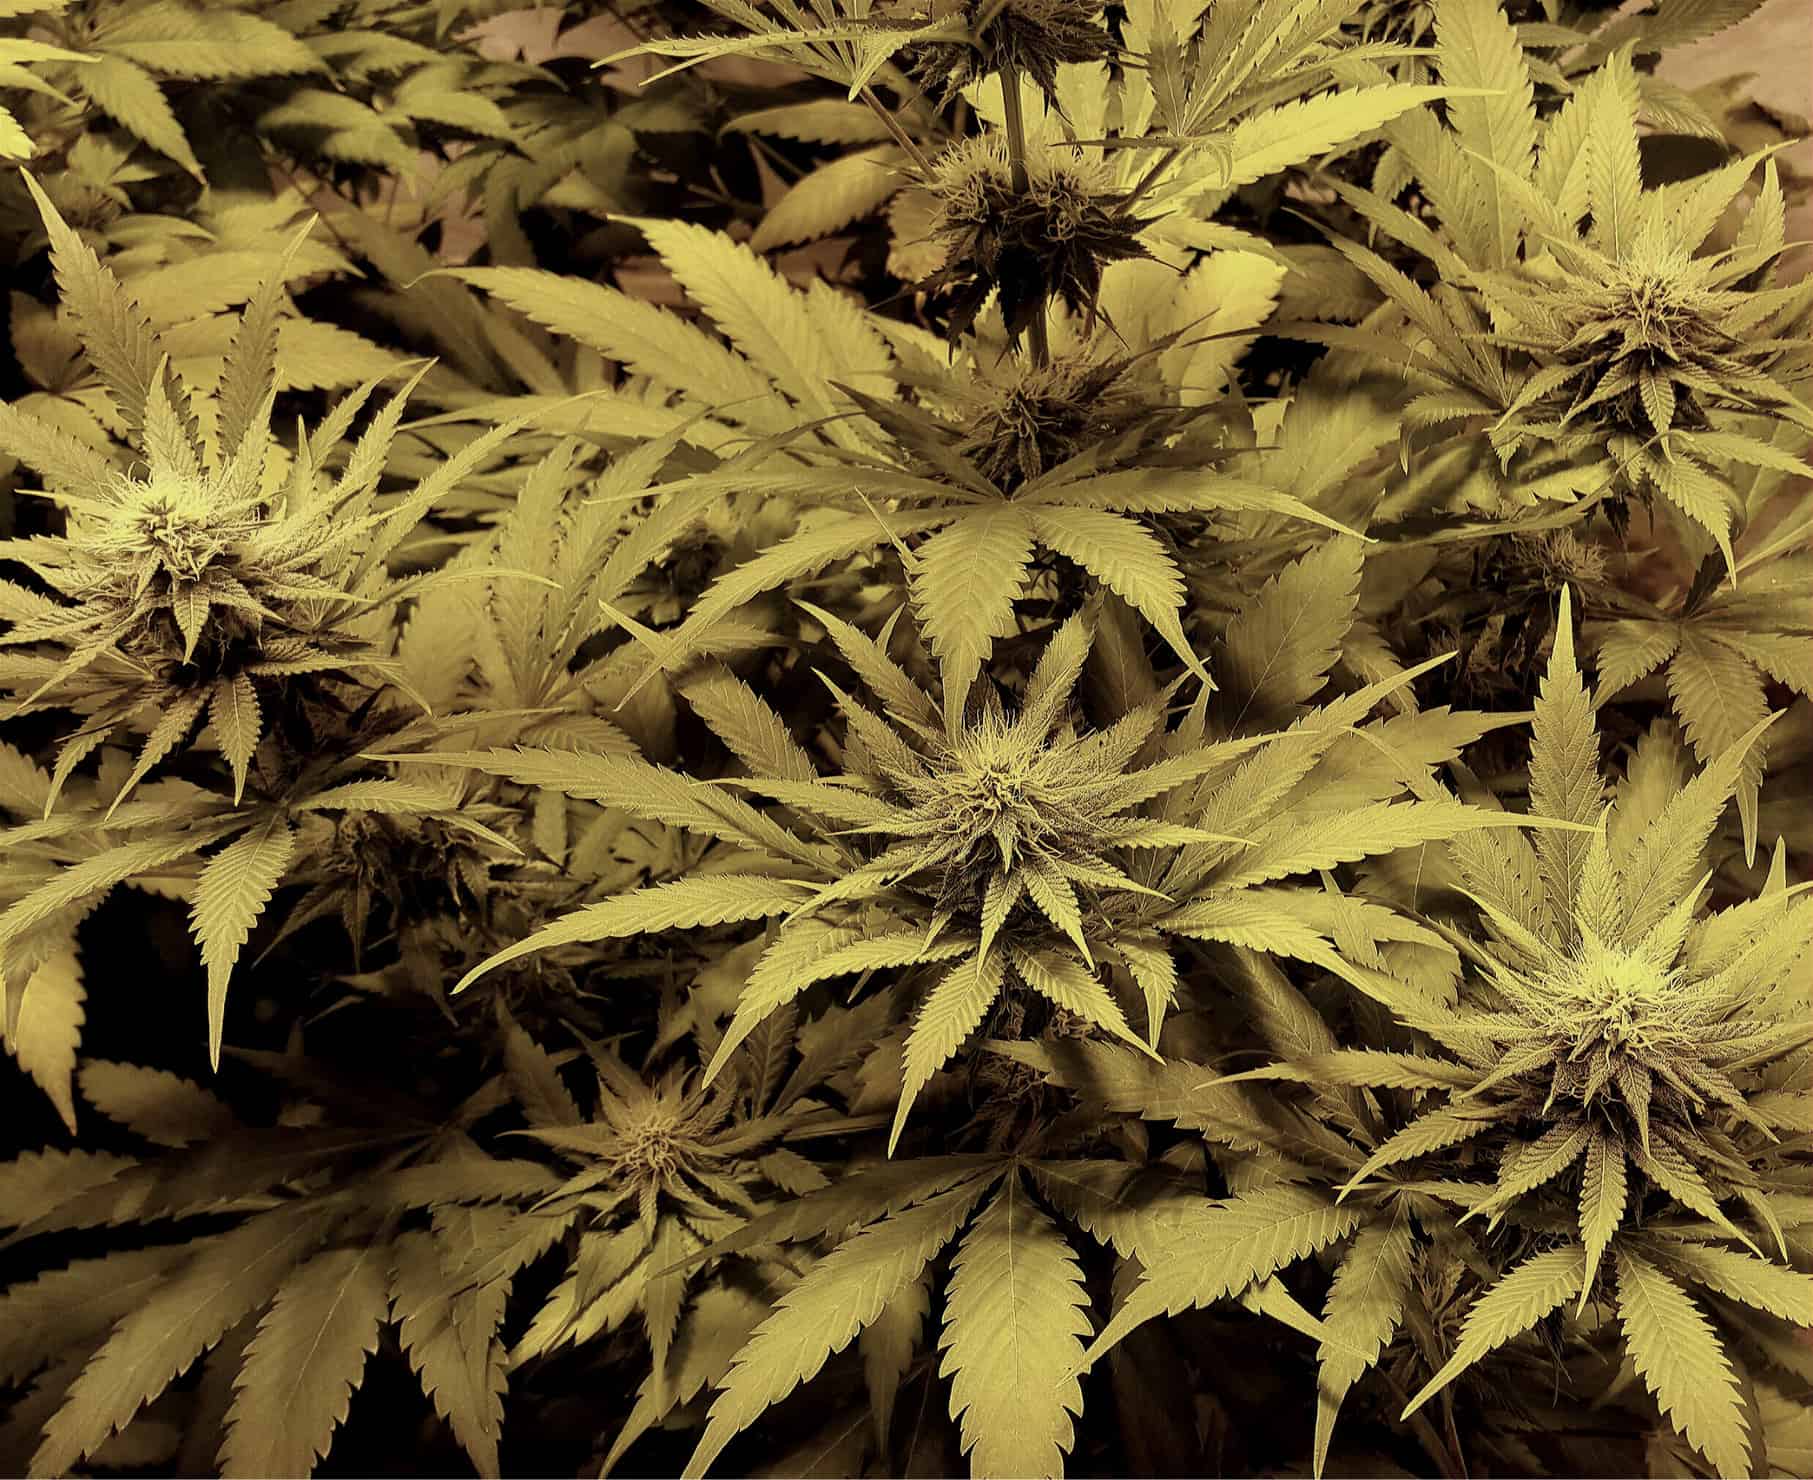 White Widow Cultivation and Controversy